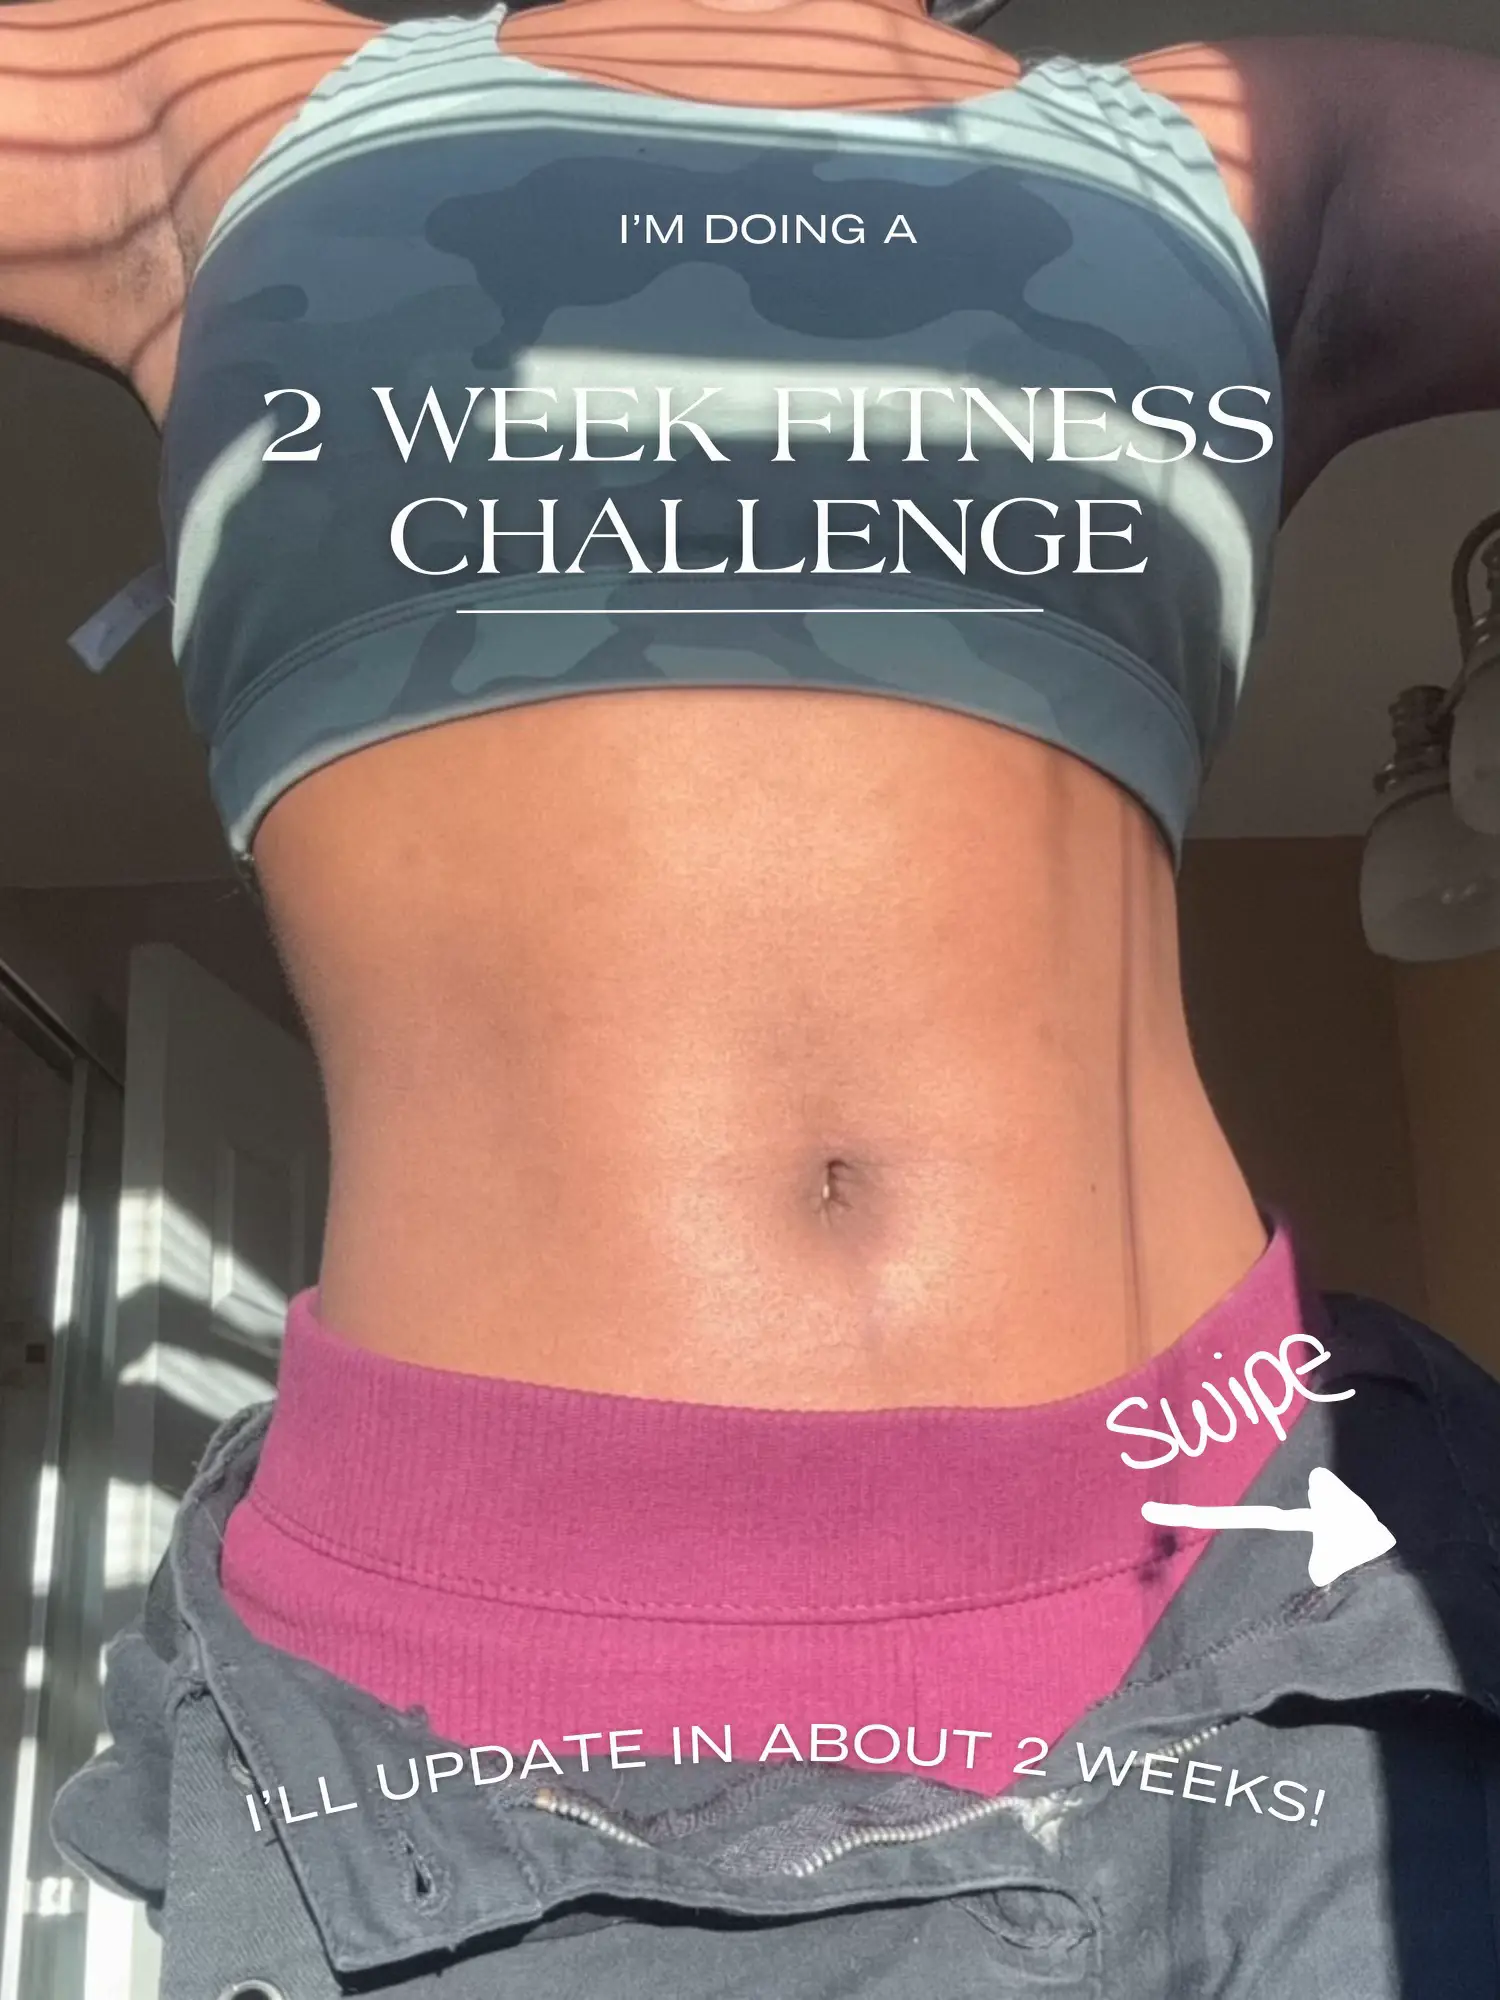 Day 9: 5 Min SIXPACK ABS [Intense SLIDER ABS] // Sculpted: 2 Week Ab  Challenge 